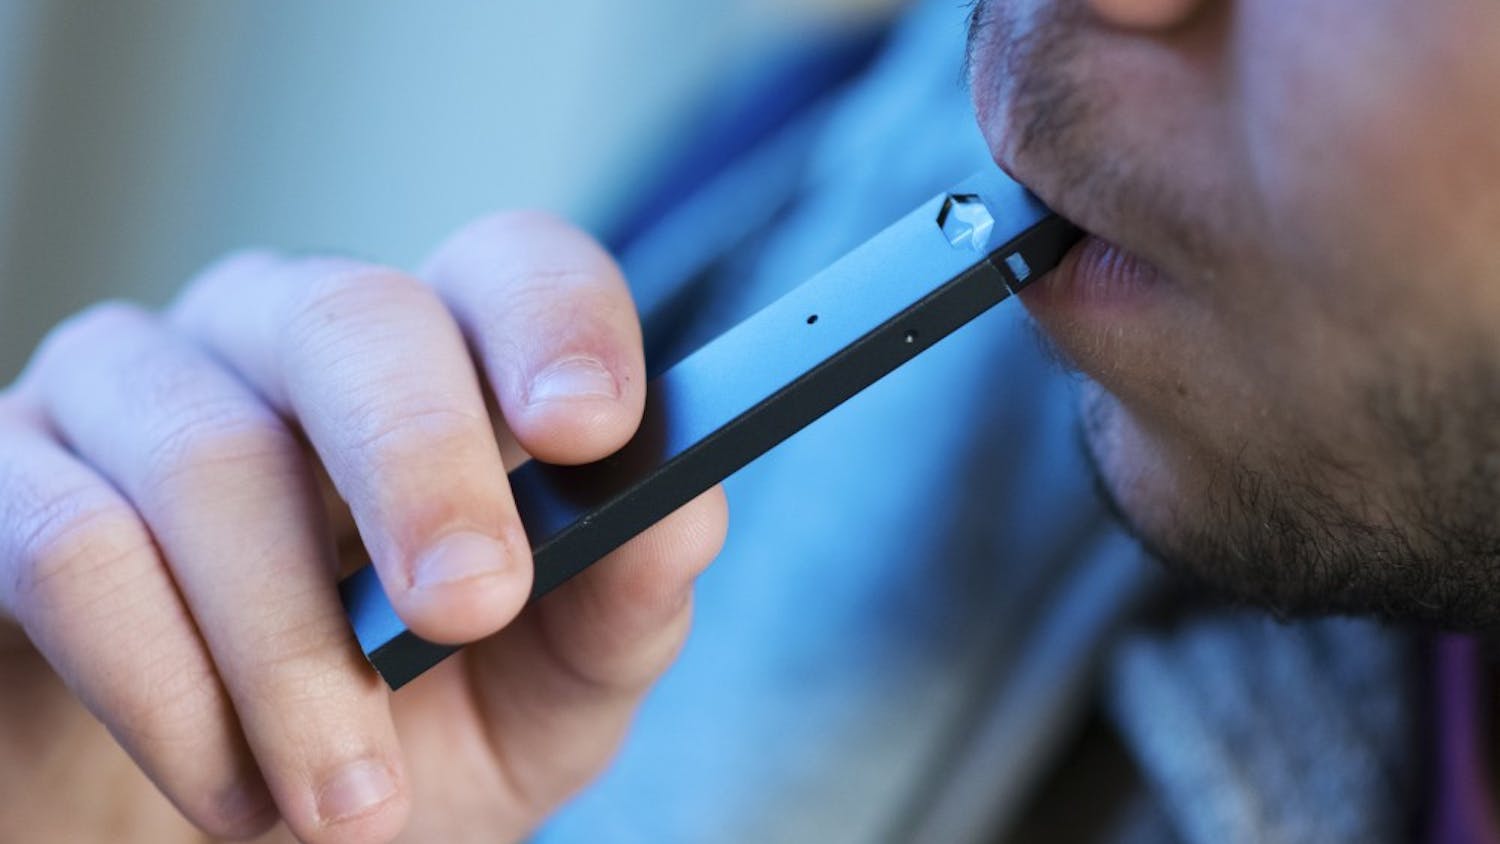 The JUUL is a type of small, USB-chargeable vaporizer, more commonly known as a ‘vape.' This kind of vape contains nicotine and is therefore illegal for minors to use.